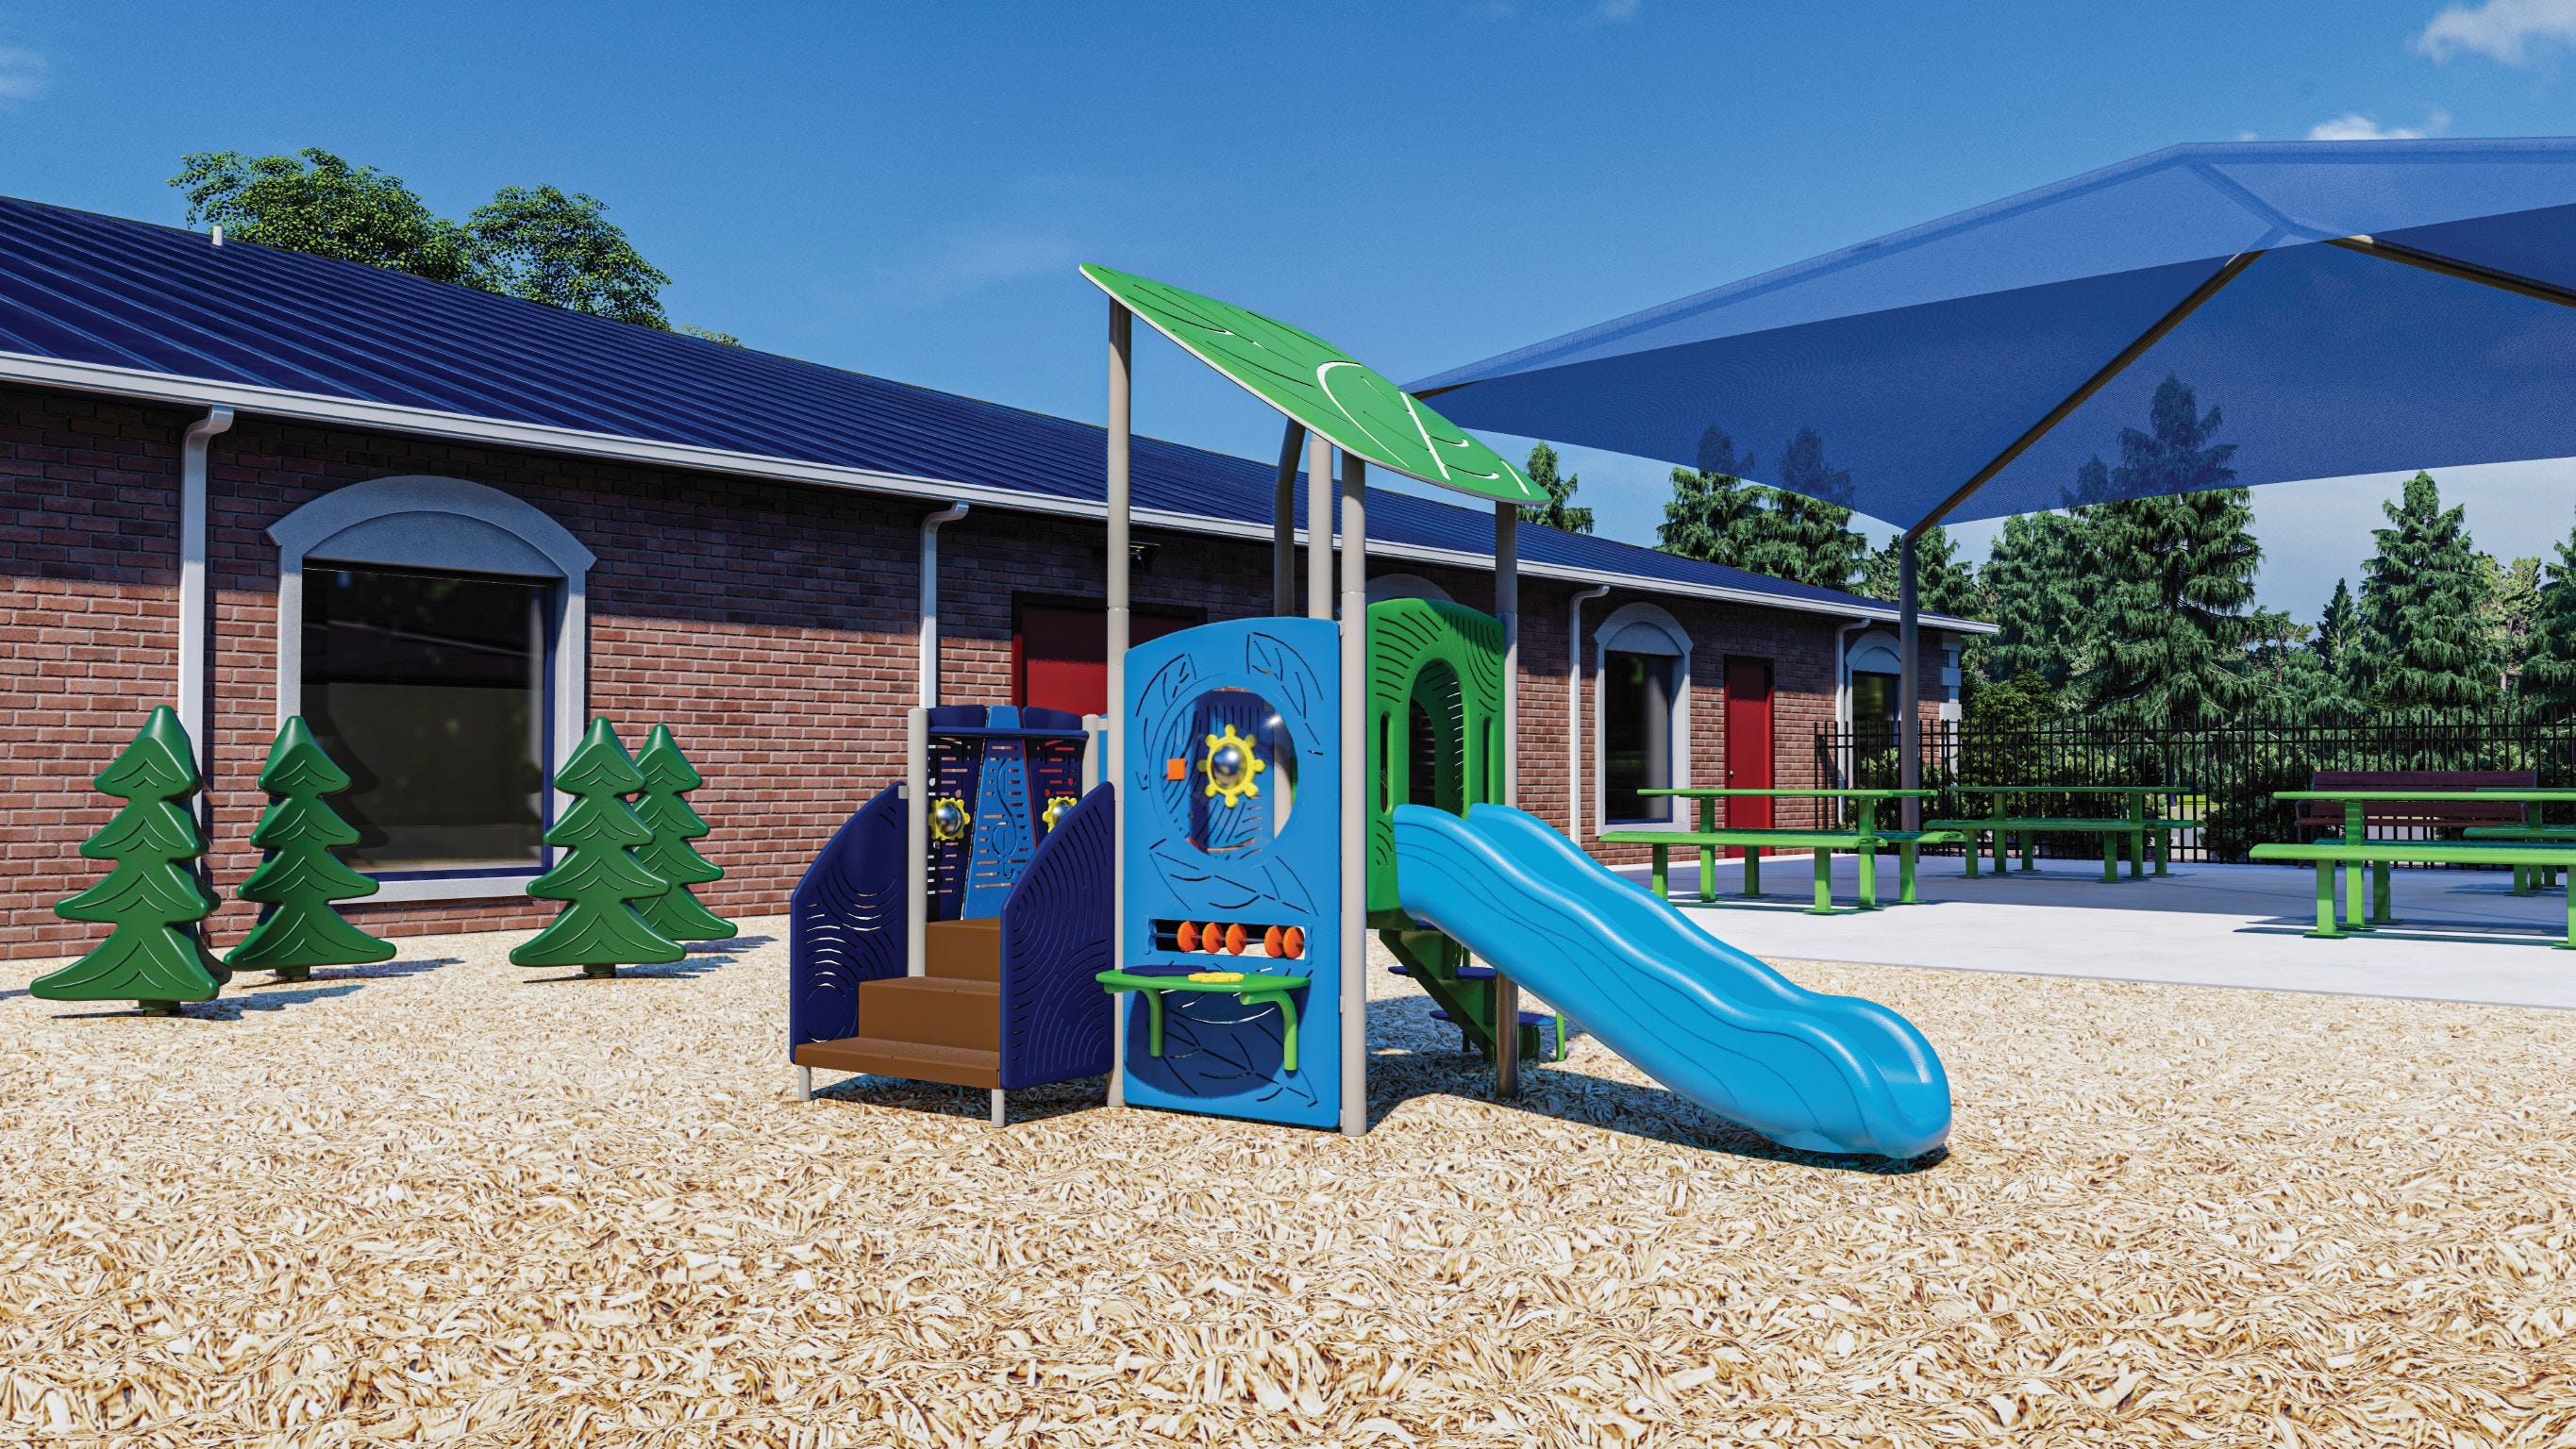 Green and blue play system